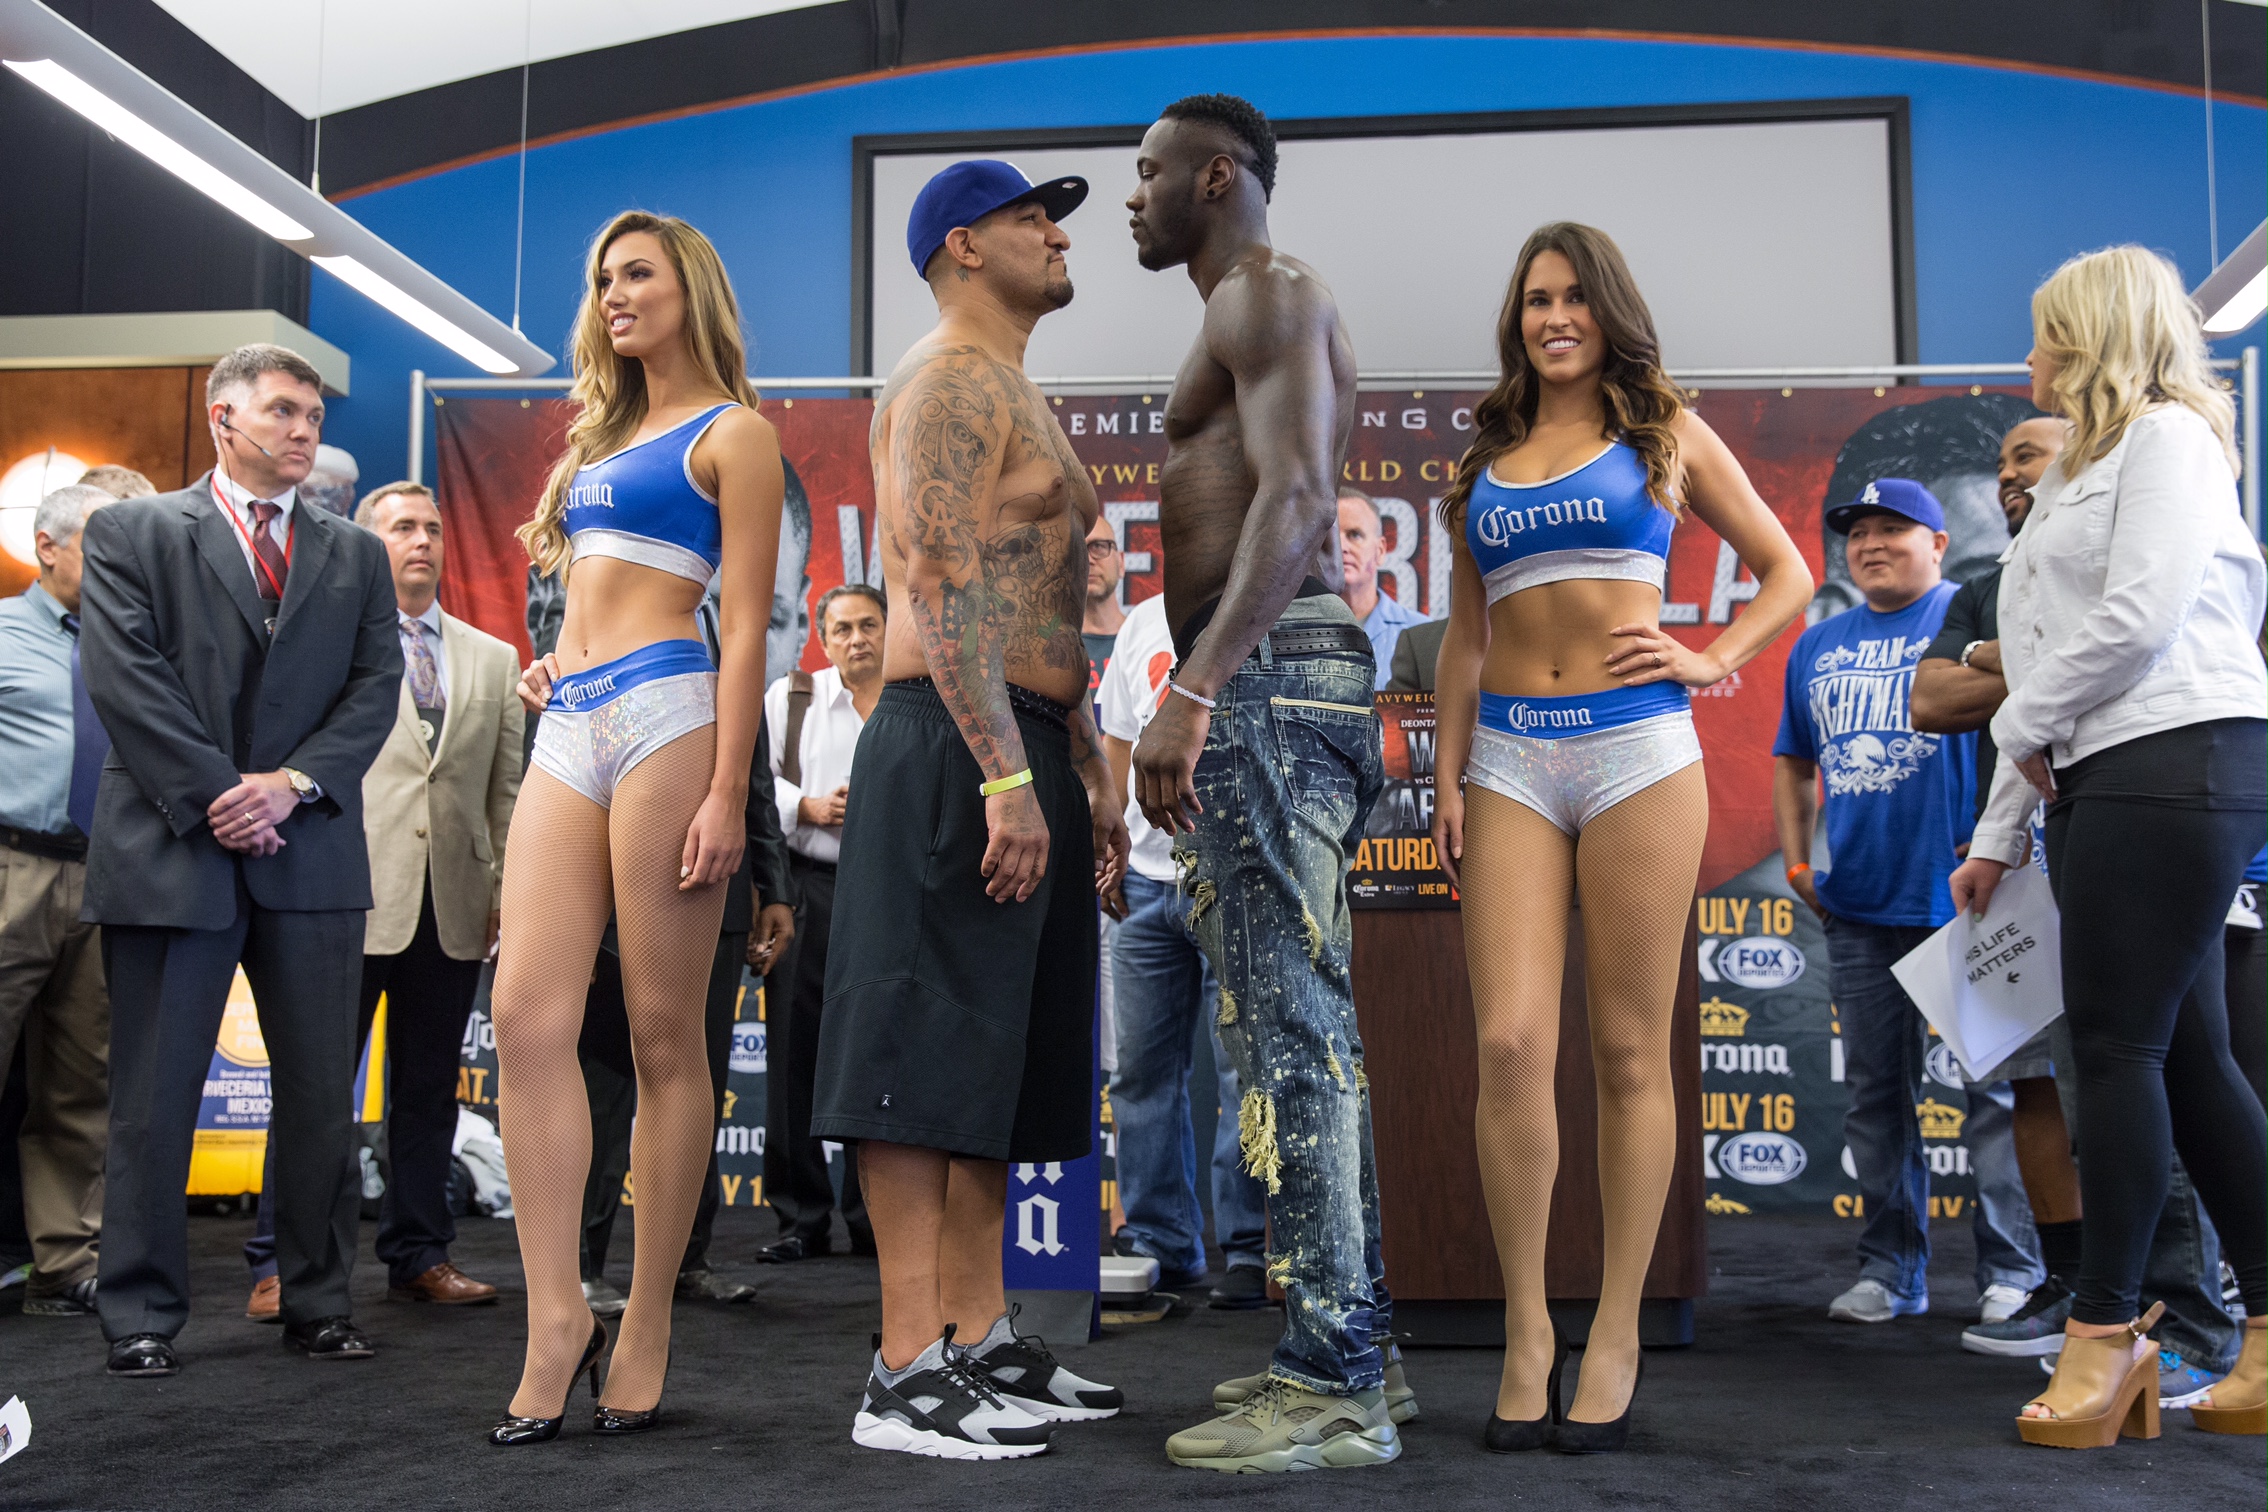 PBC on Fox Results: Wilder Obliterates Arreola, Lubin and Diaz Win by Decision